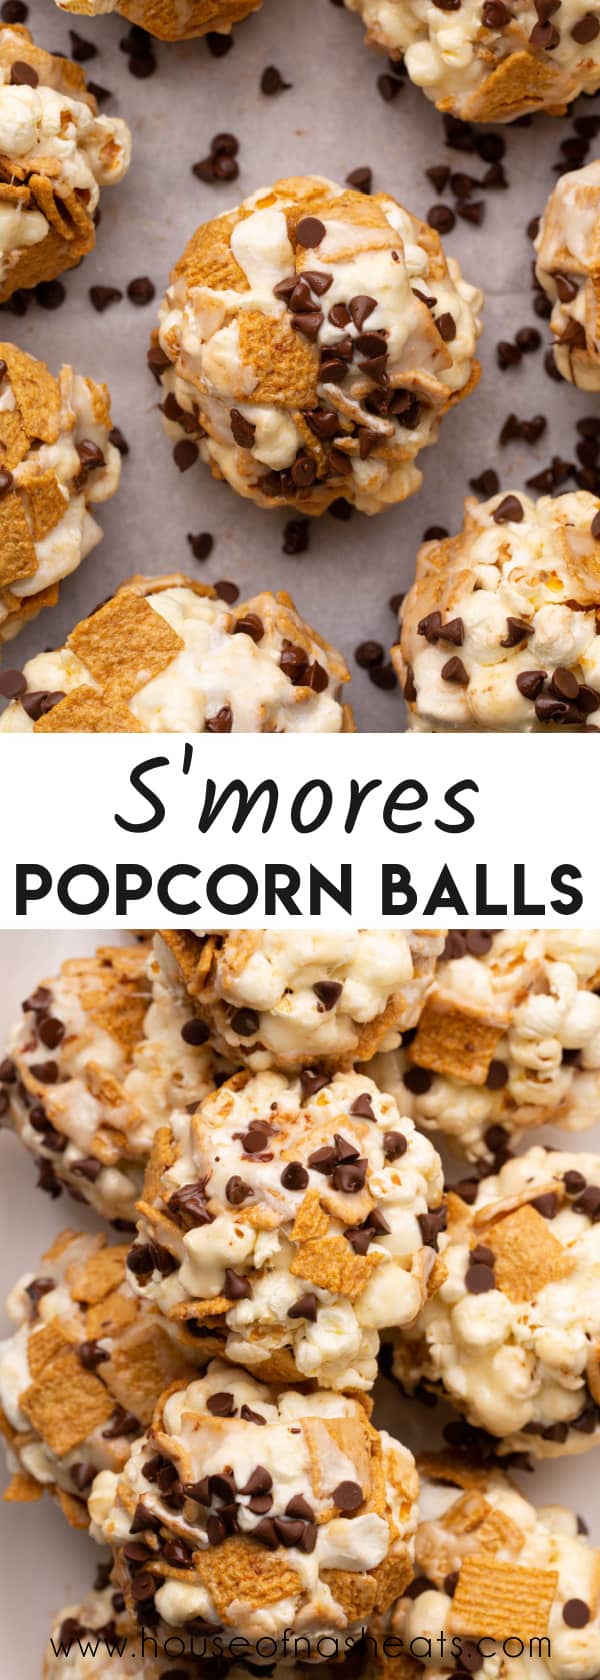 A collage of images of s'mores popcorn balls with text overlay.